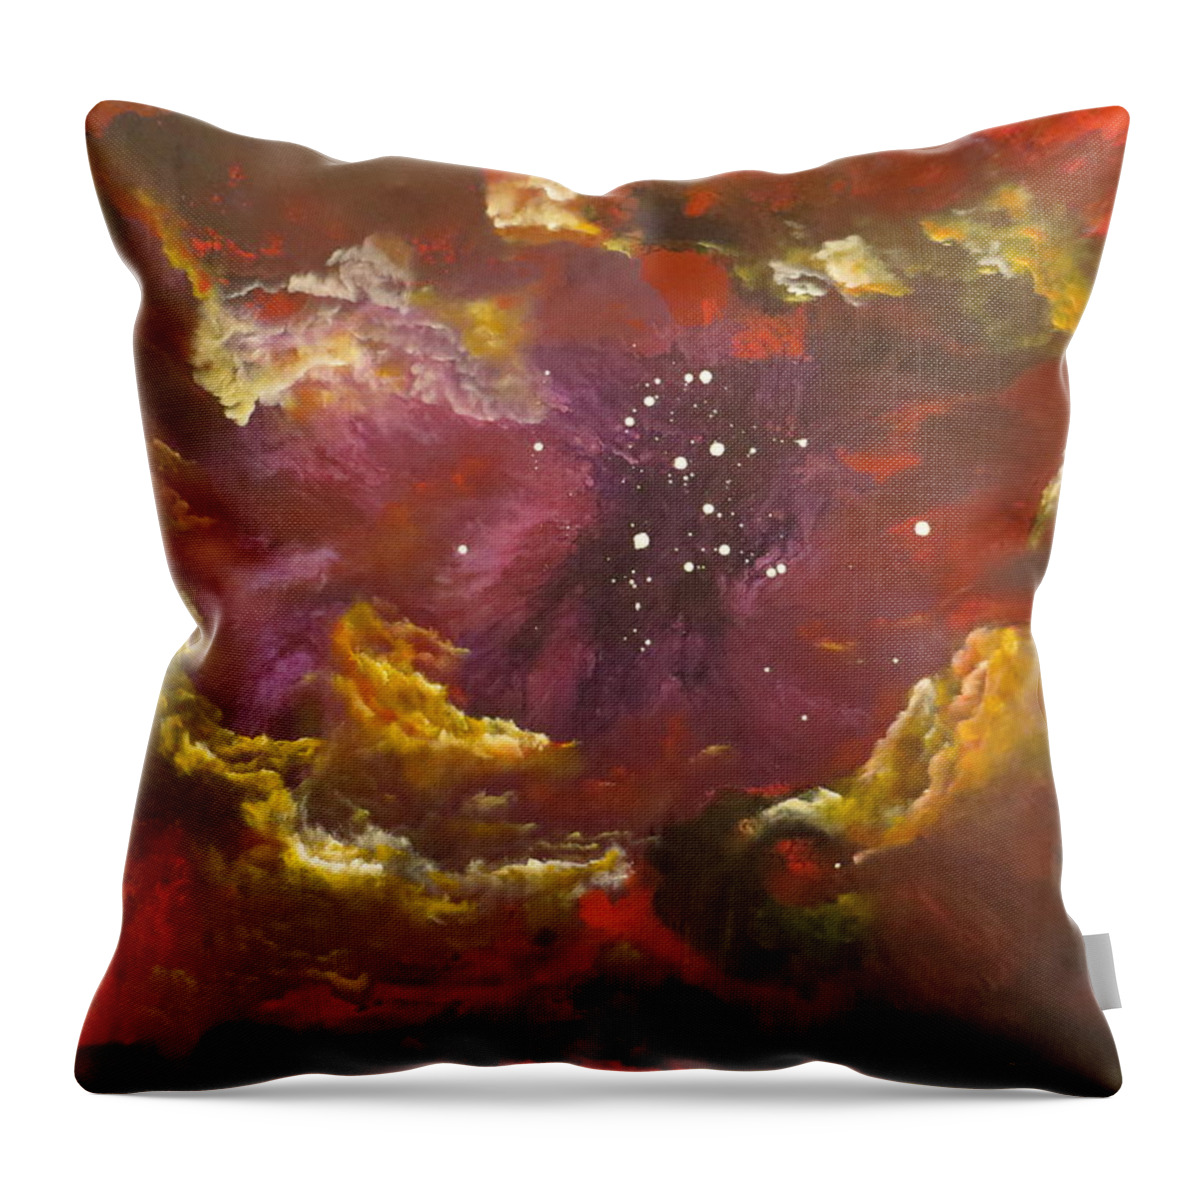 Abstract Throw Pillow featuring the painting Endless by Soraya Silvestri